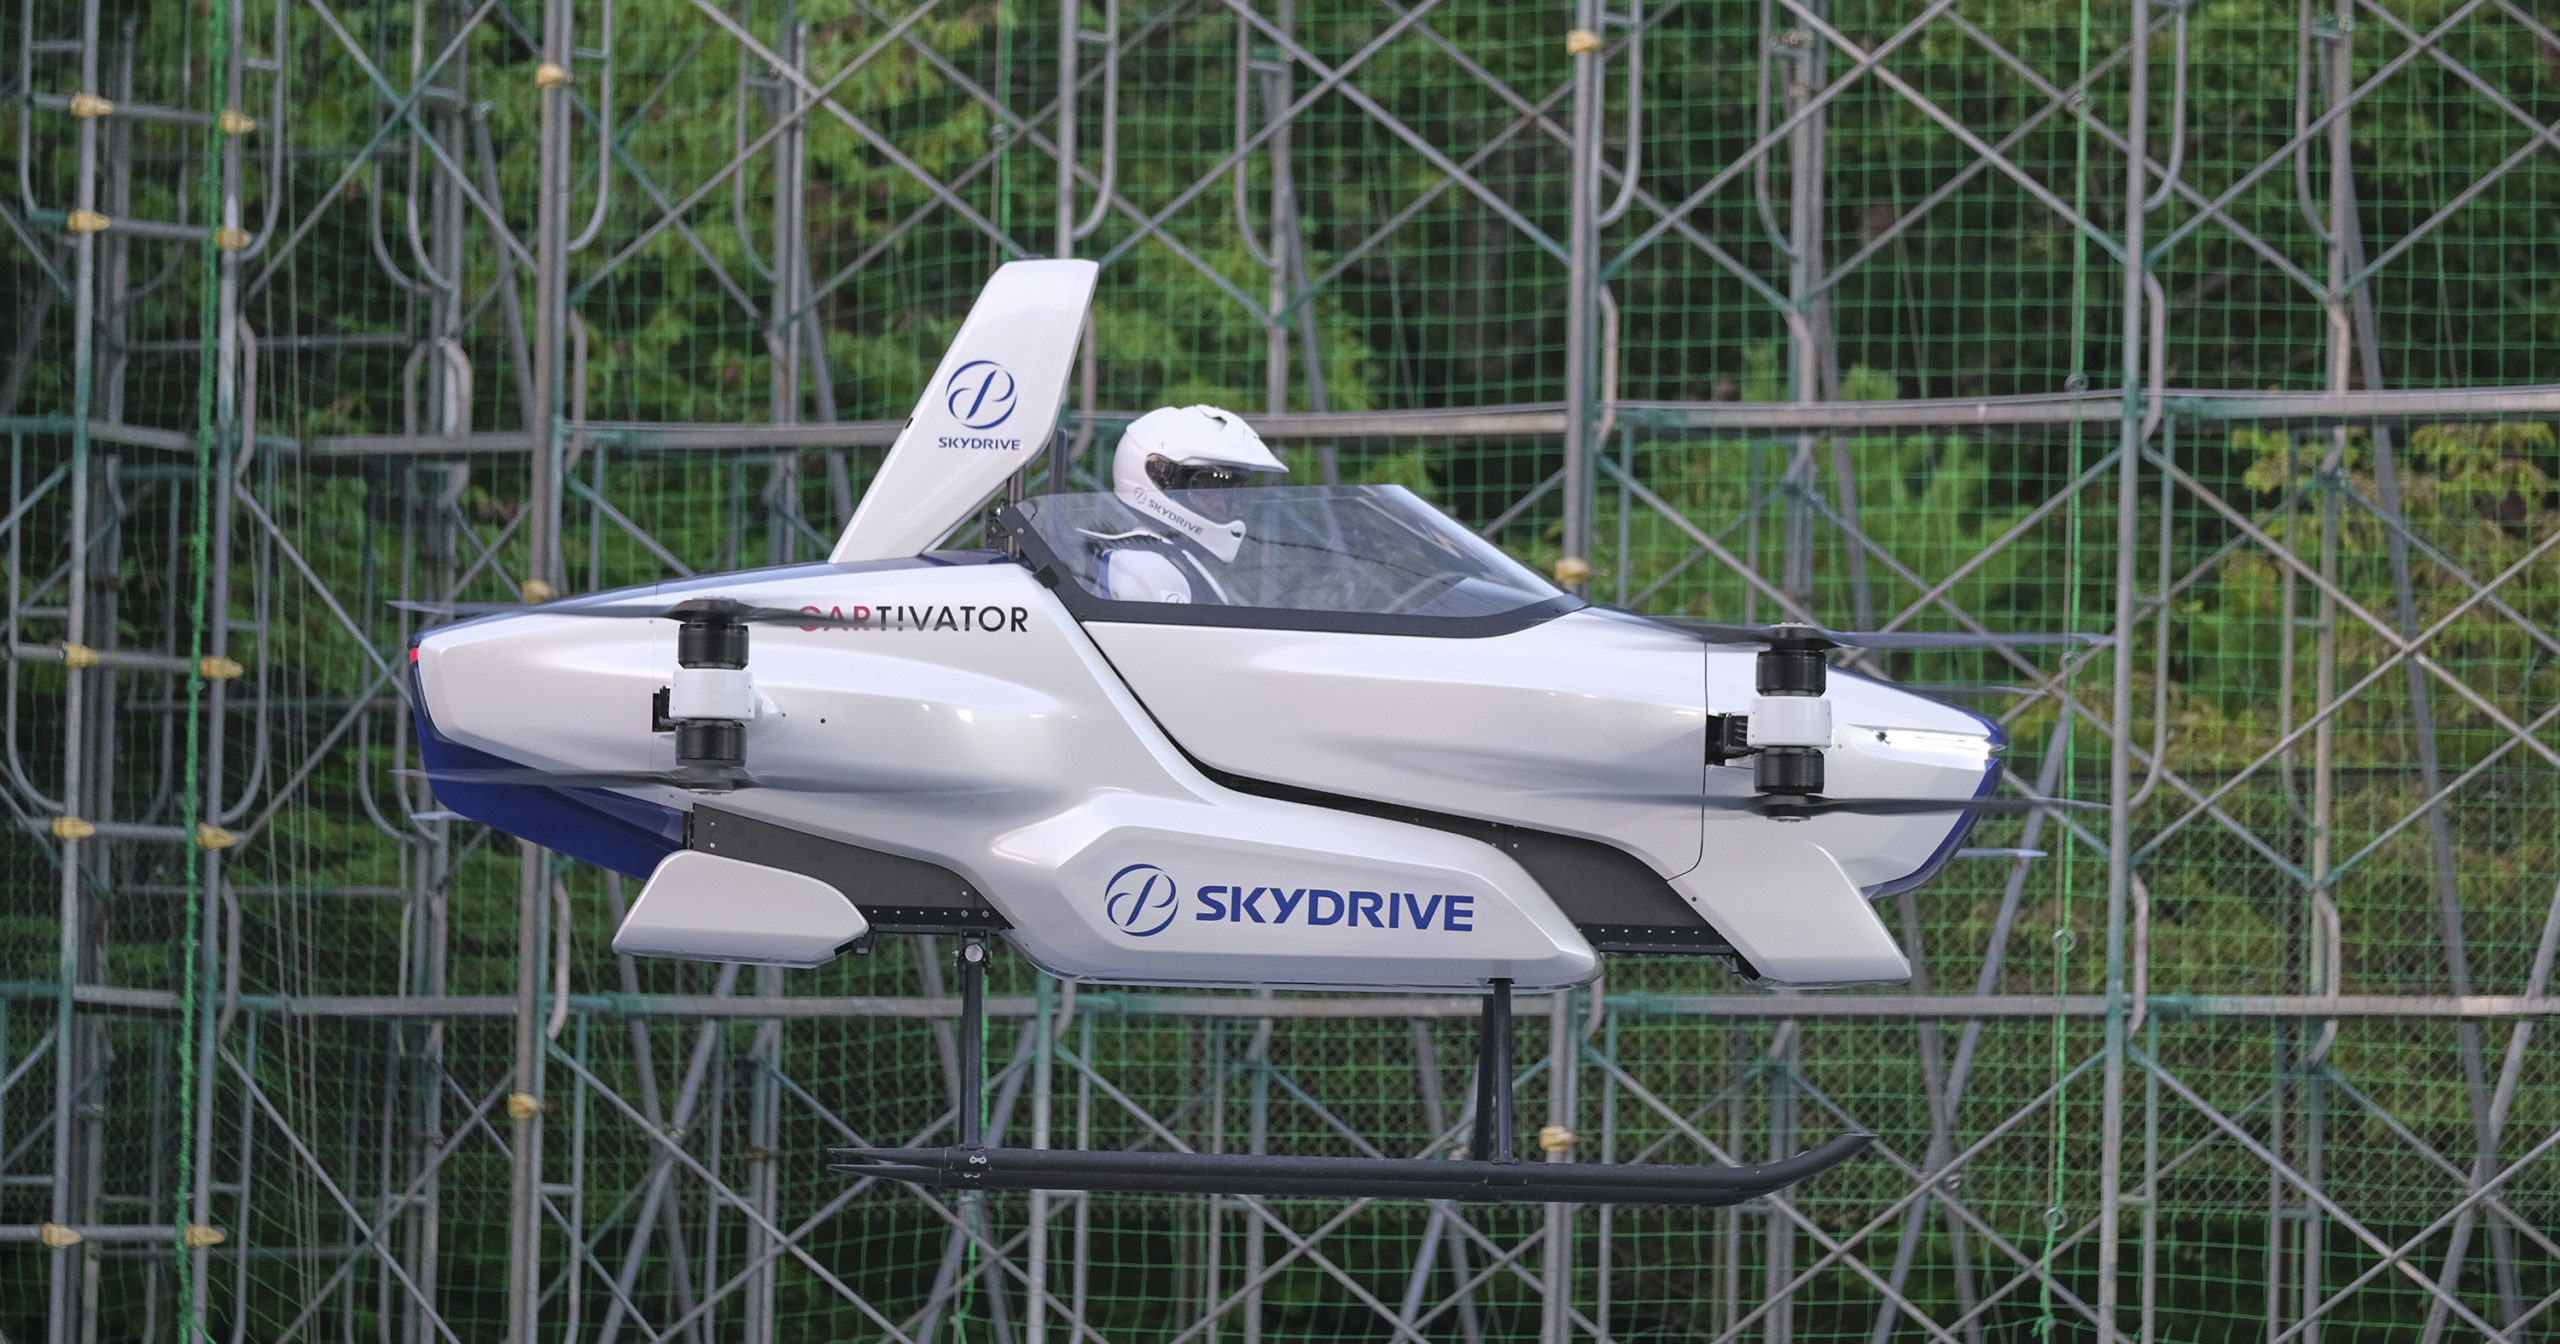 This August 2020 photo released by SkyDrive/CARTIVATOR shows a test flight of a manned "flying car" at Toyota Test Field in Toyota, central Japan. Japan’s SkyDrive Inc. has carried out a successful though modest test flight with one person aboard.